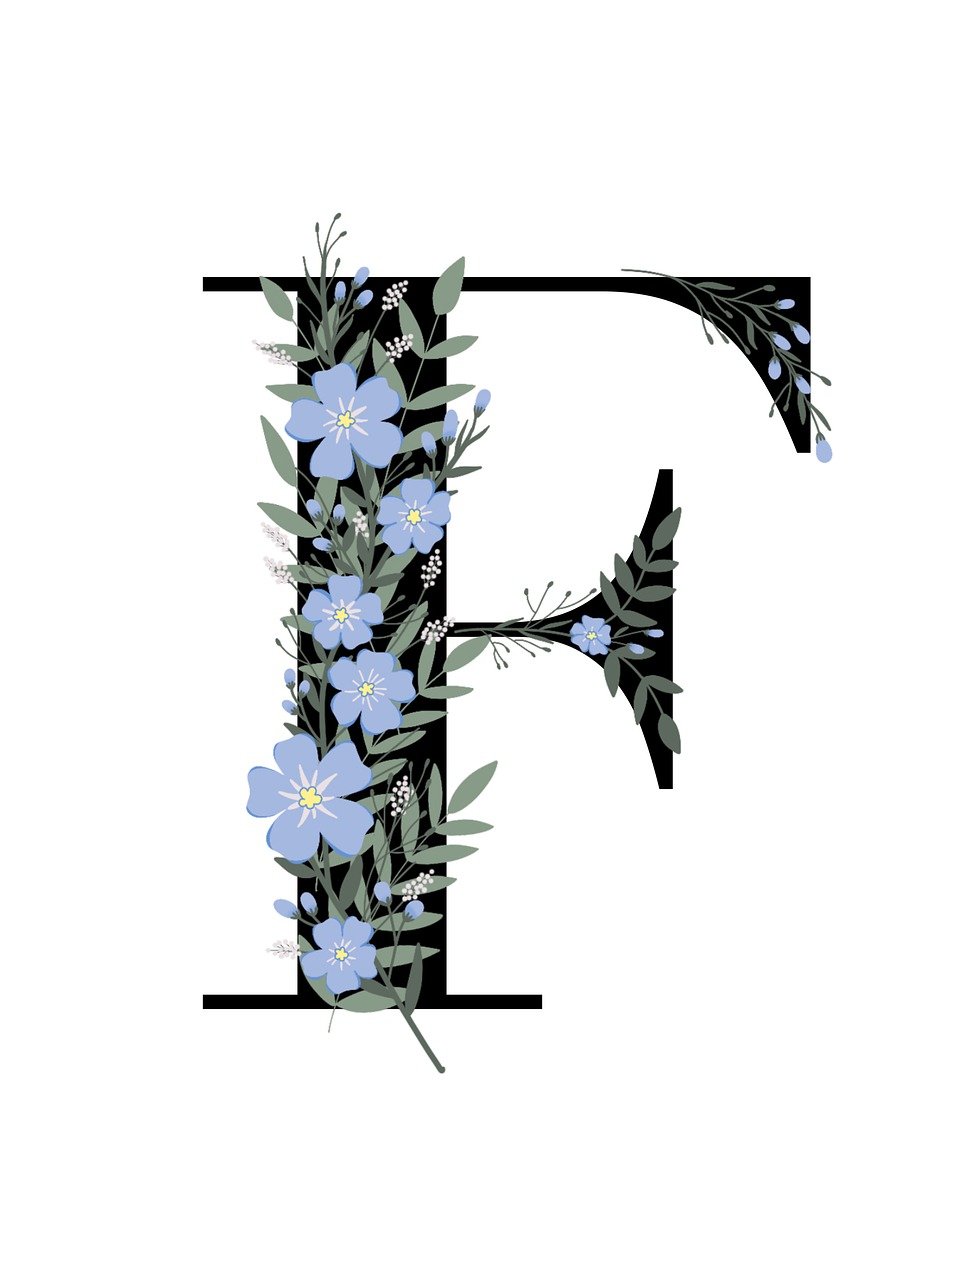 floral capital letter f in black and white